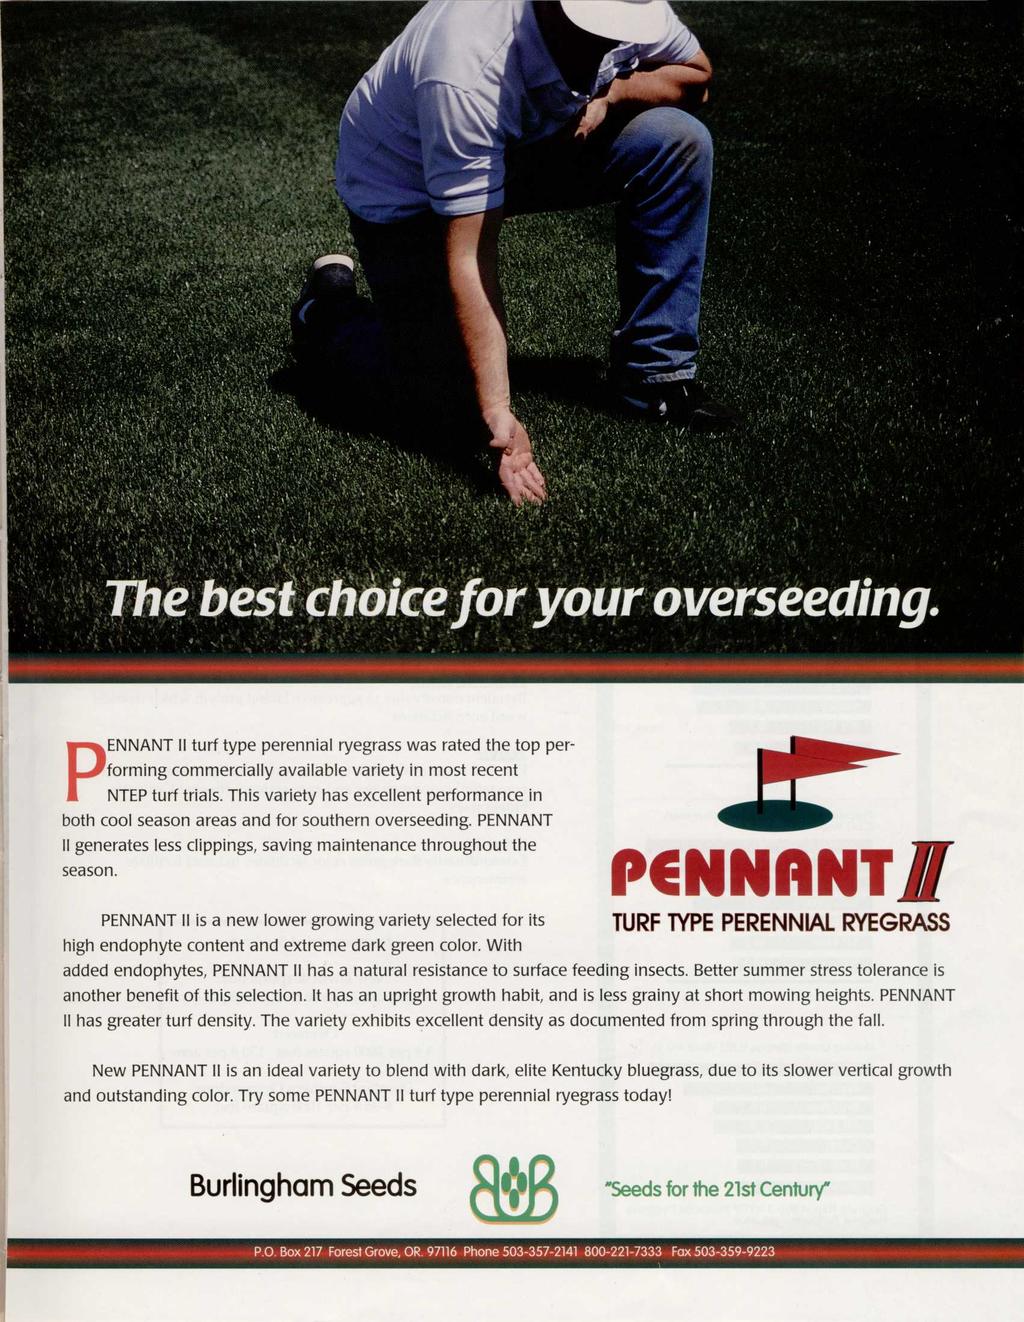 The best choice for your overseeding. turf type perennial ryegrass was rated the top performing commercially available variety in most recent NTEP turf trials.